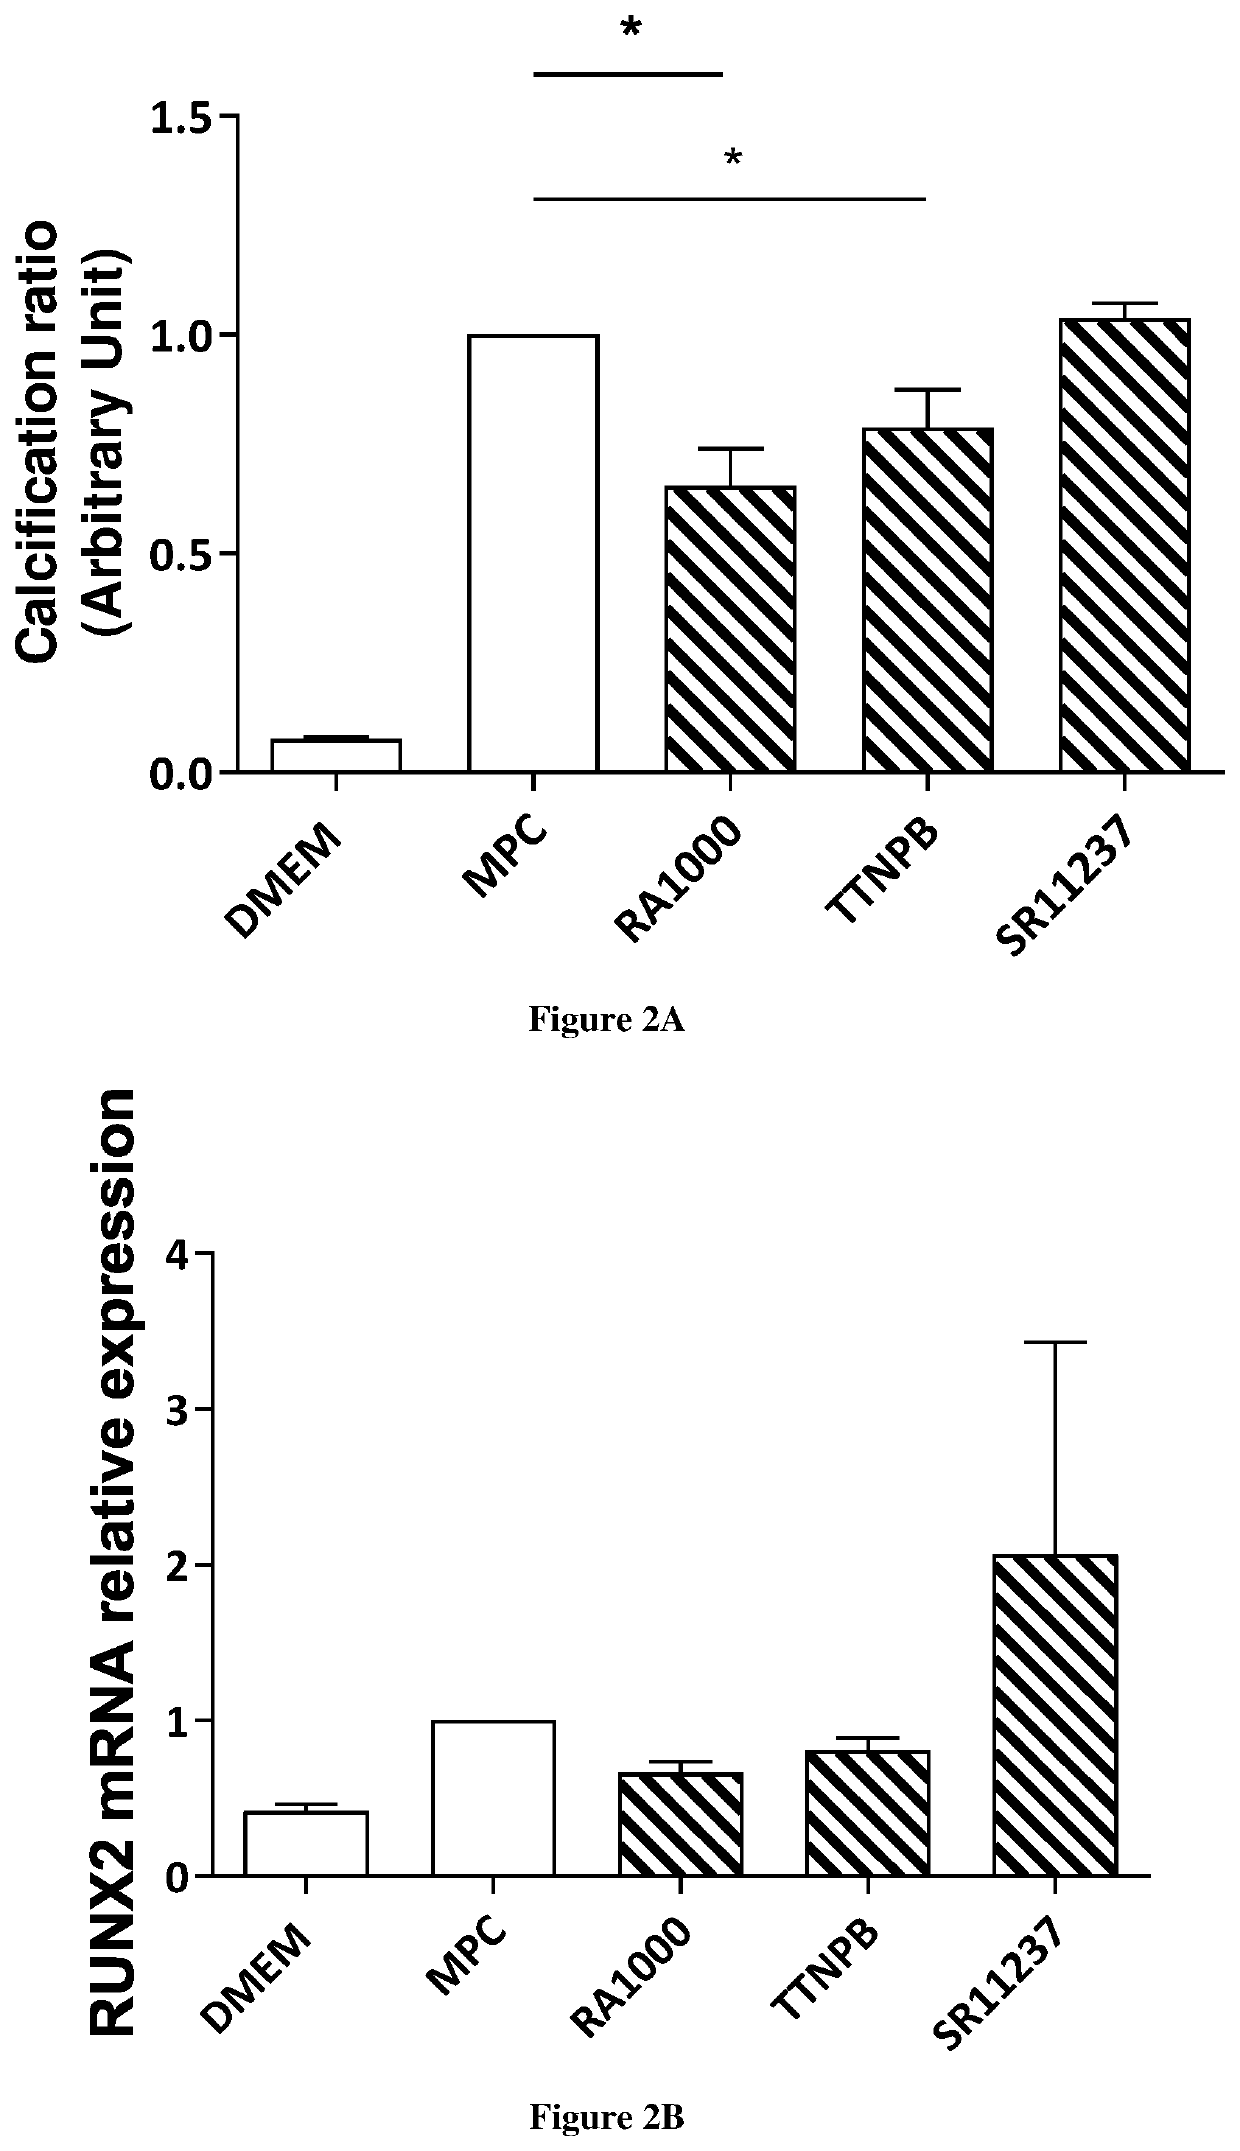 Use of retinoic acid receptor (RAR) agonists for reversing, preventing, or delaying calcification of aortic valve